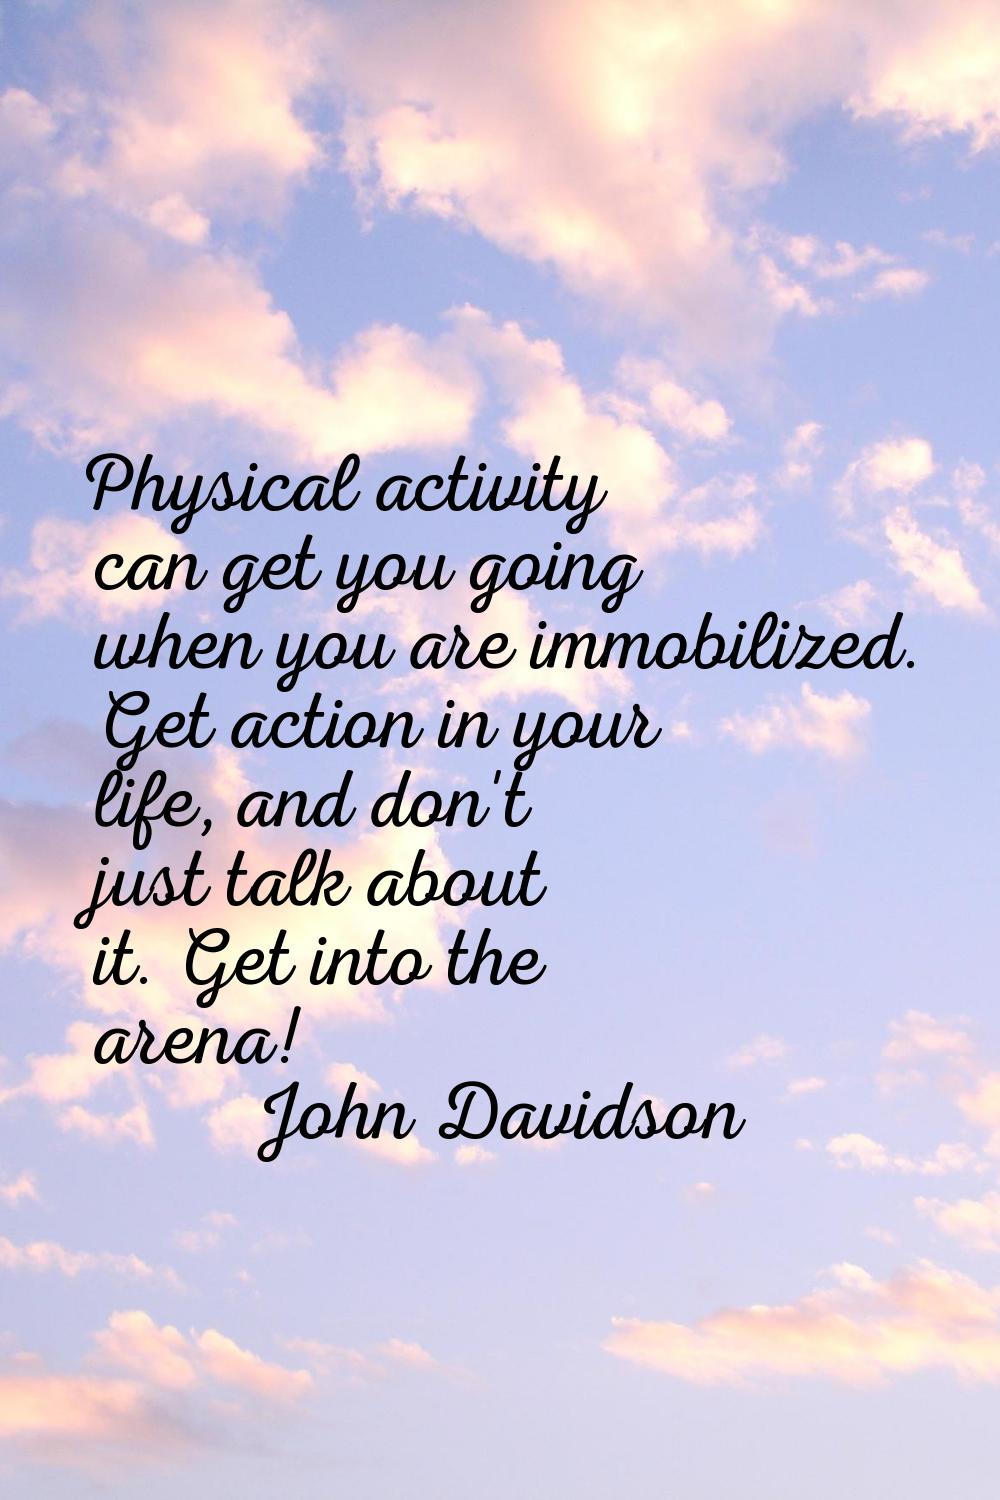 Physical activity can get you going when you are immobilized. Get action in your life, and don't ju